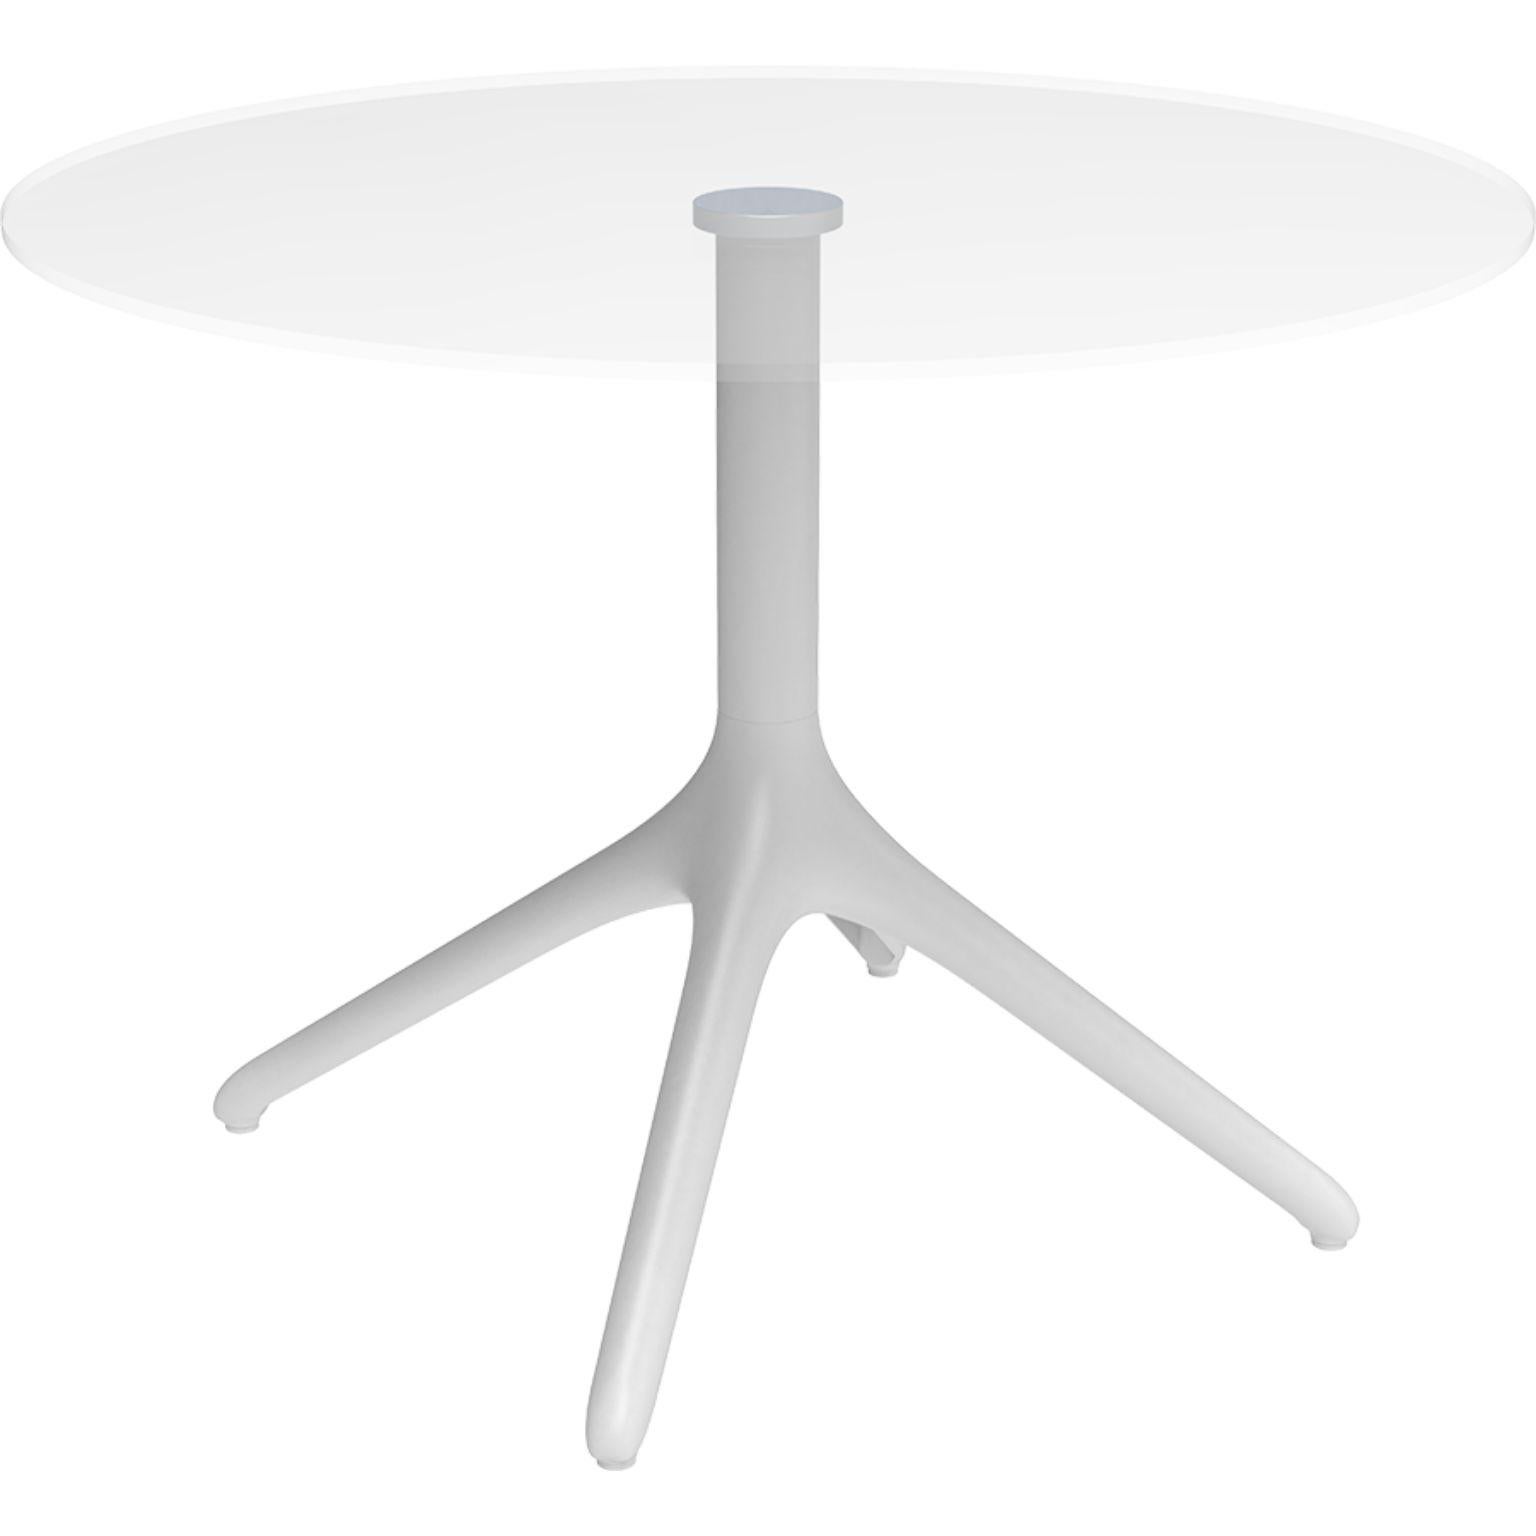 Uni white table XL 73 by MOWEE
Dimensions: D50 x H73 cm
Material: Aluminium, tempered glass
Weight: 9 kg
Also available in different colours and finishes.

A table designed to be as versatile as possible and can coexist with a variety of